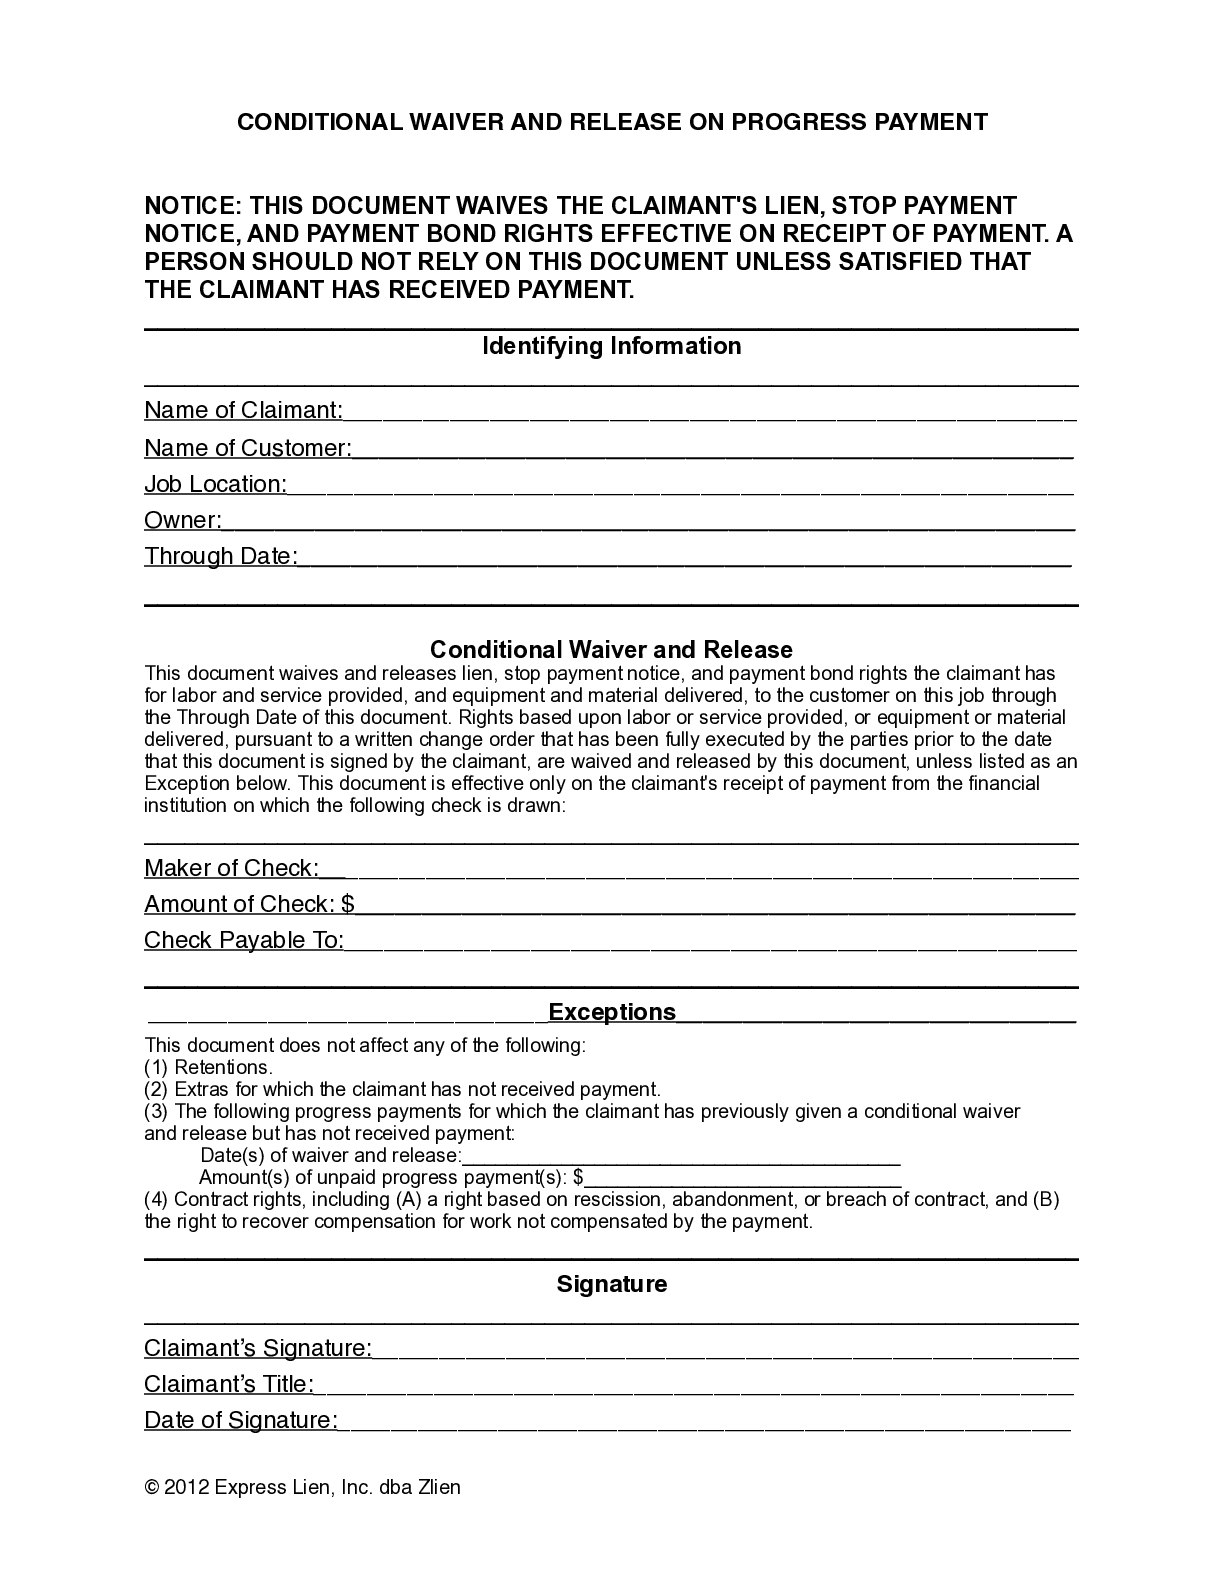 Minnesota Partial Conditional Lien Waiver Form - free from